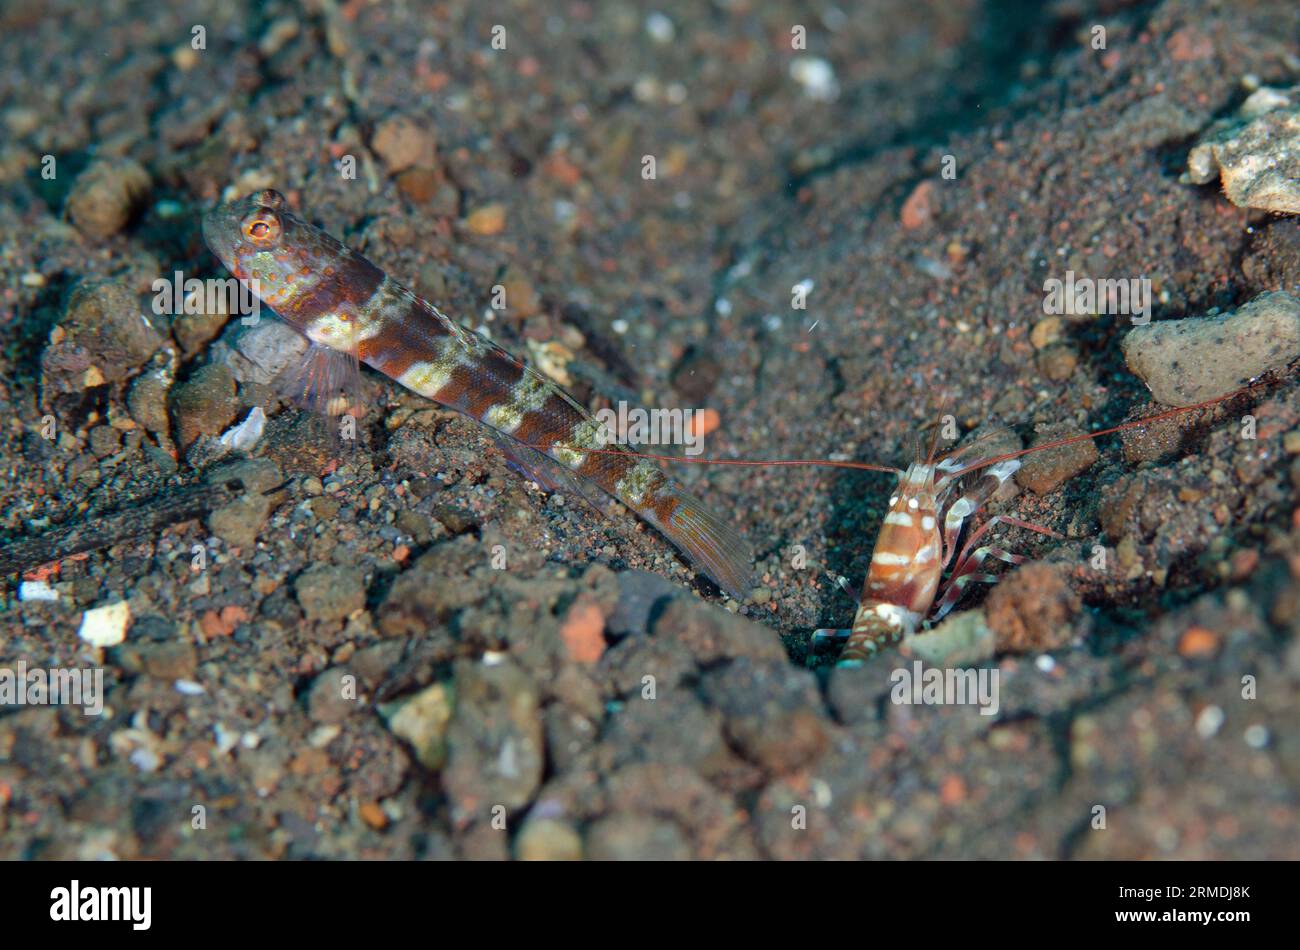 Blotchy Shrimpgoby, Amblyeleotris periophthalma, with Tiger Snapping Shrimp, Alpheus bellulus, cleaning hole in sand, Pong Pong dive site, Seraya, Kar Stock Photo